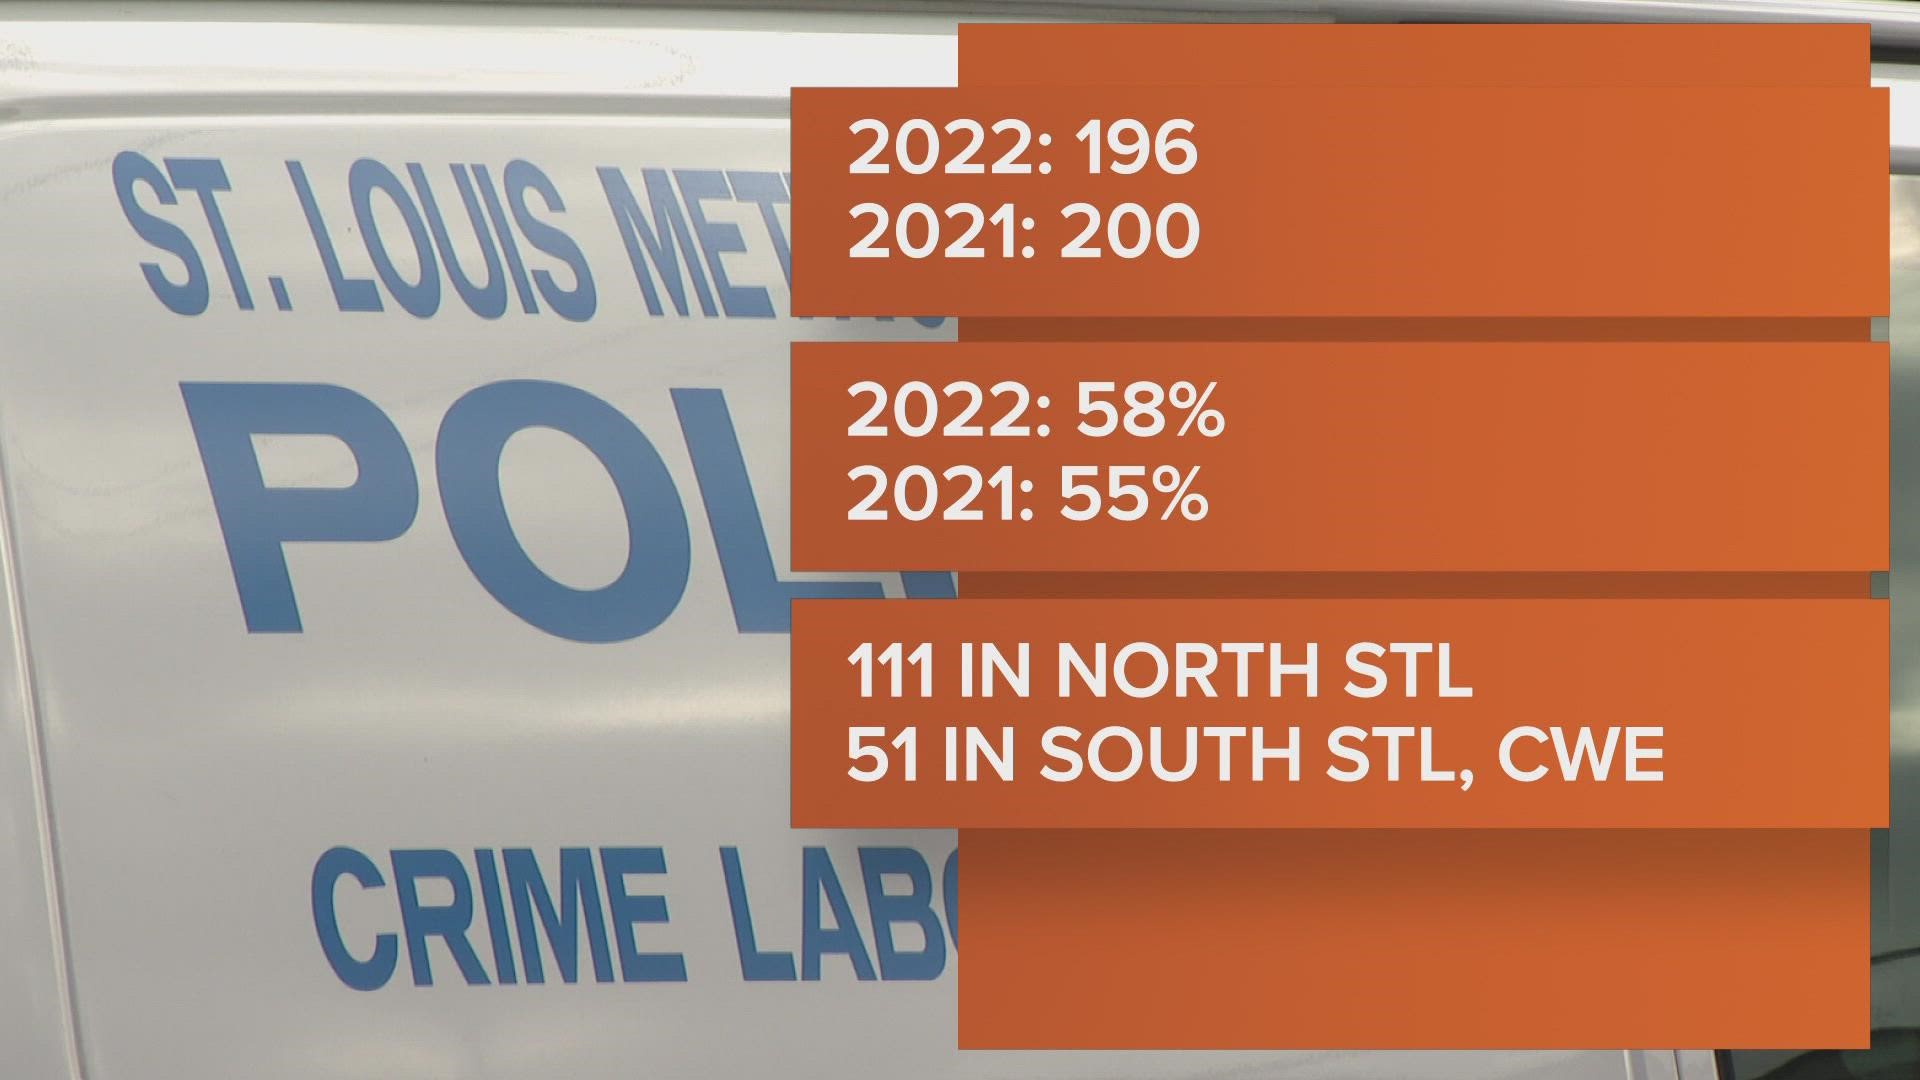 This year, St. Louis City police reported 196 homicides so far in 2022. About 58% of those cases were solved.